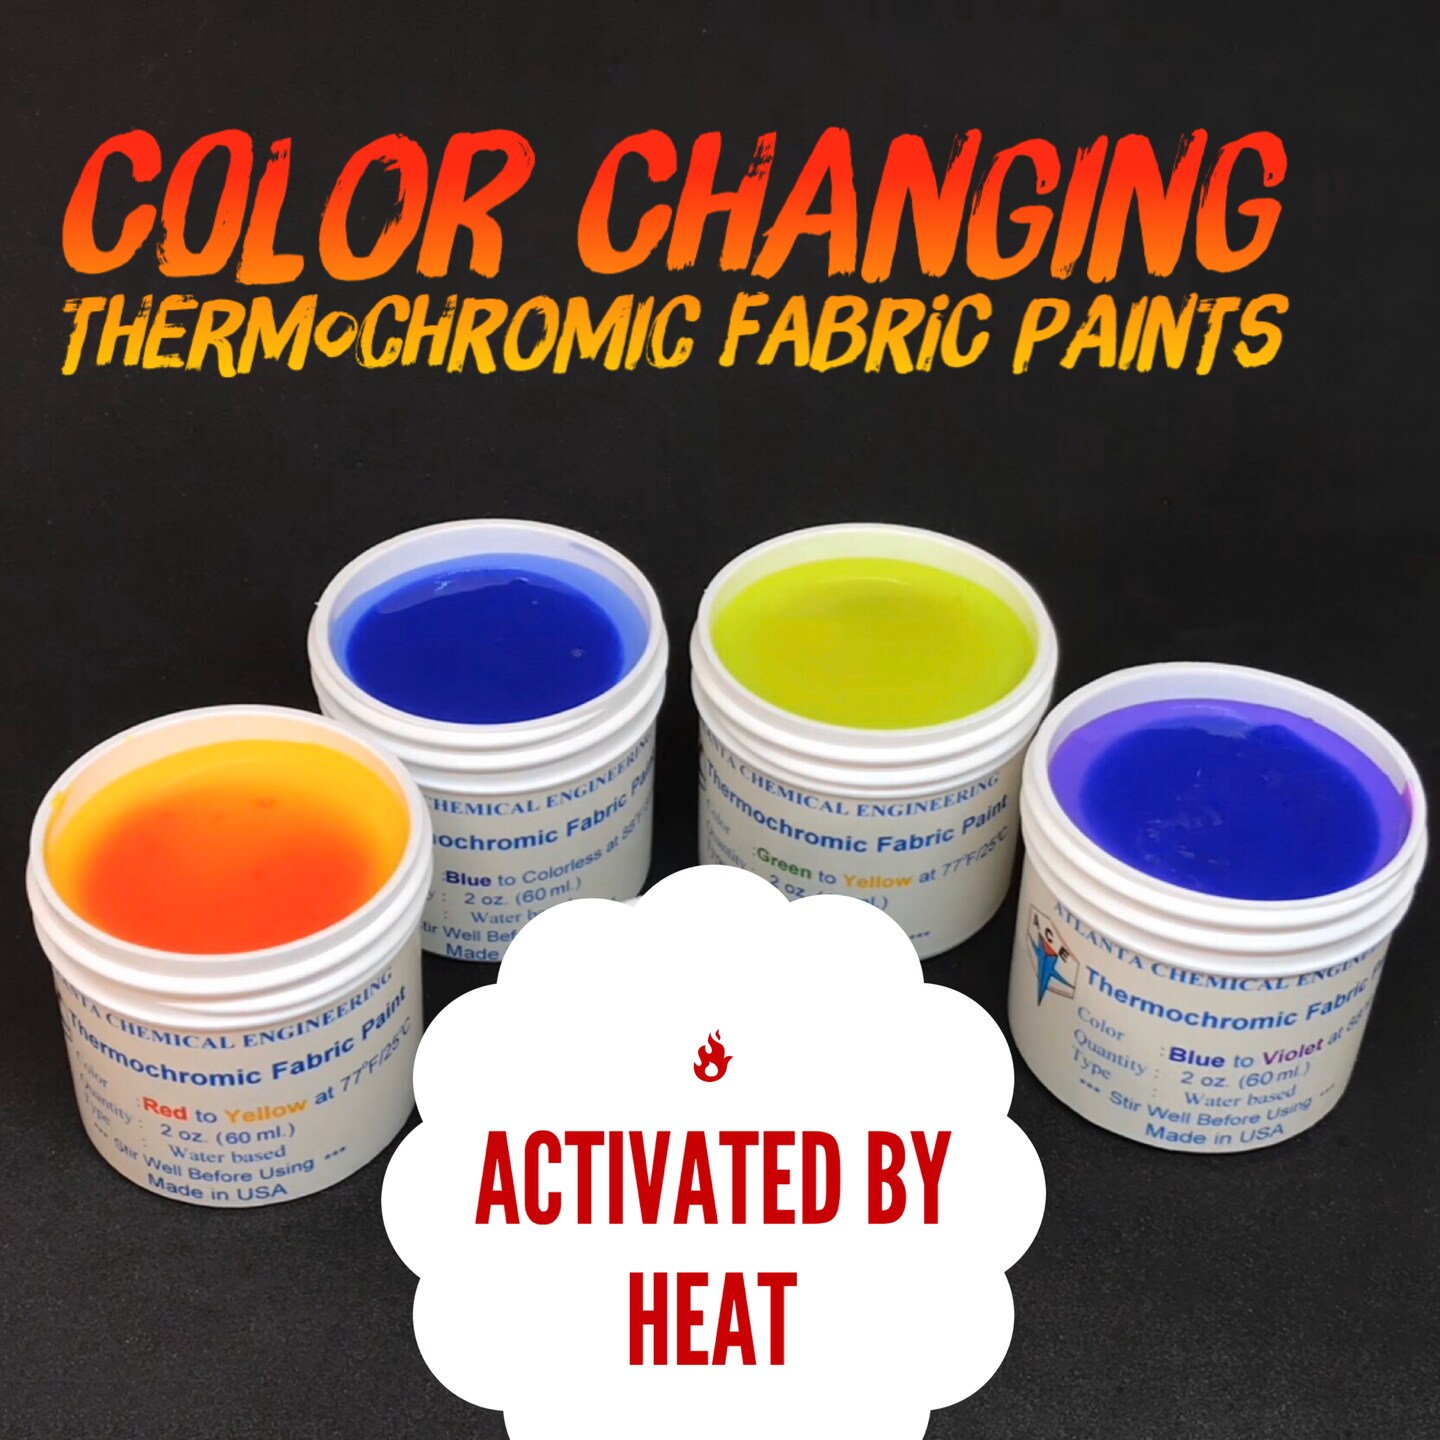 Color Changing Heat Sensitive Thermochromic Fabric Paint Atlanta Chemical